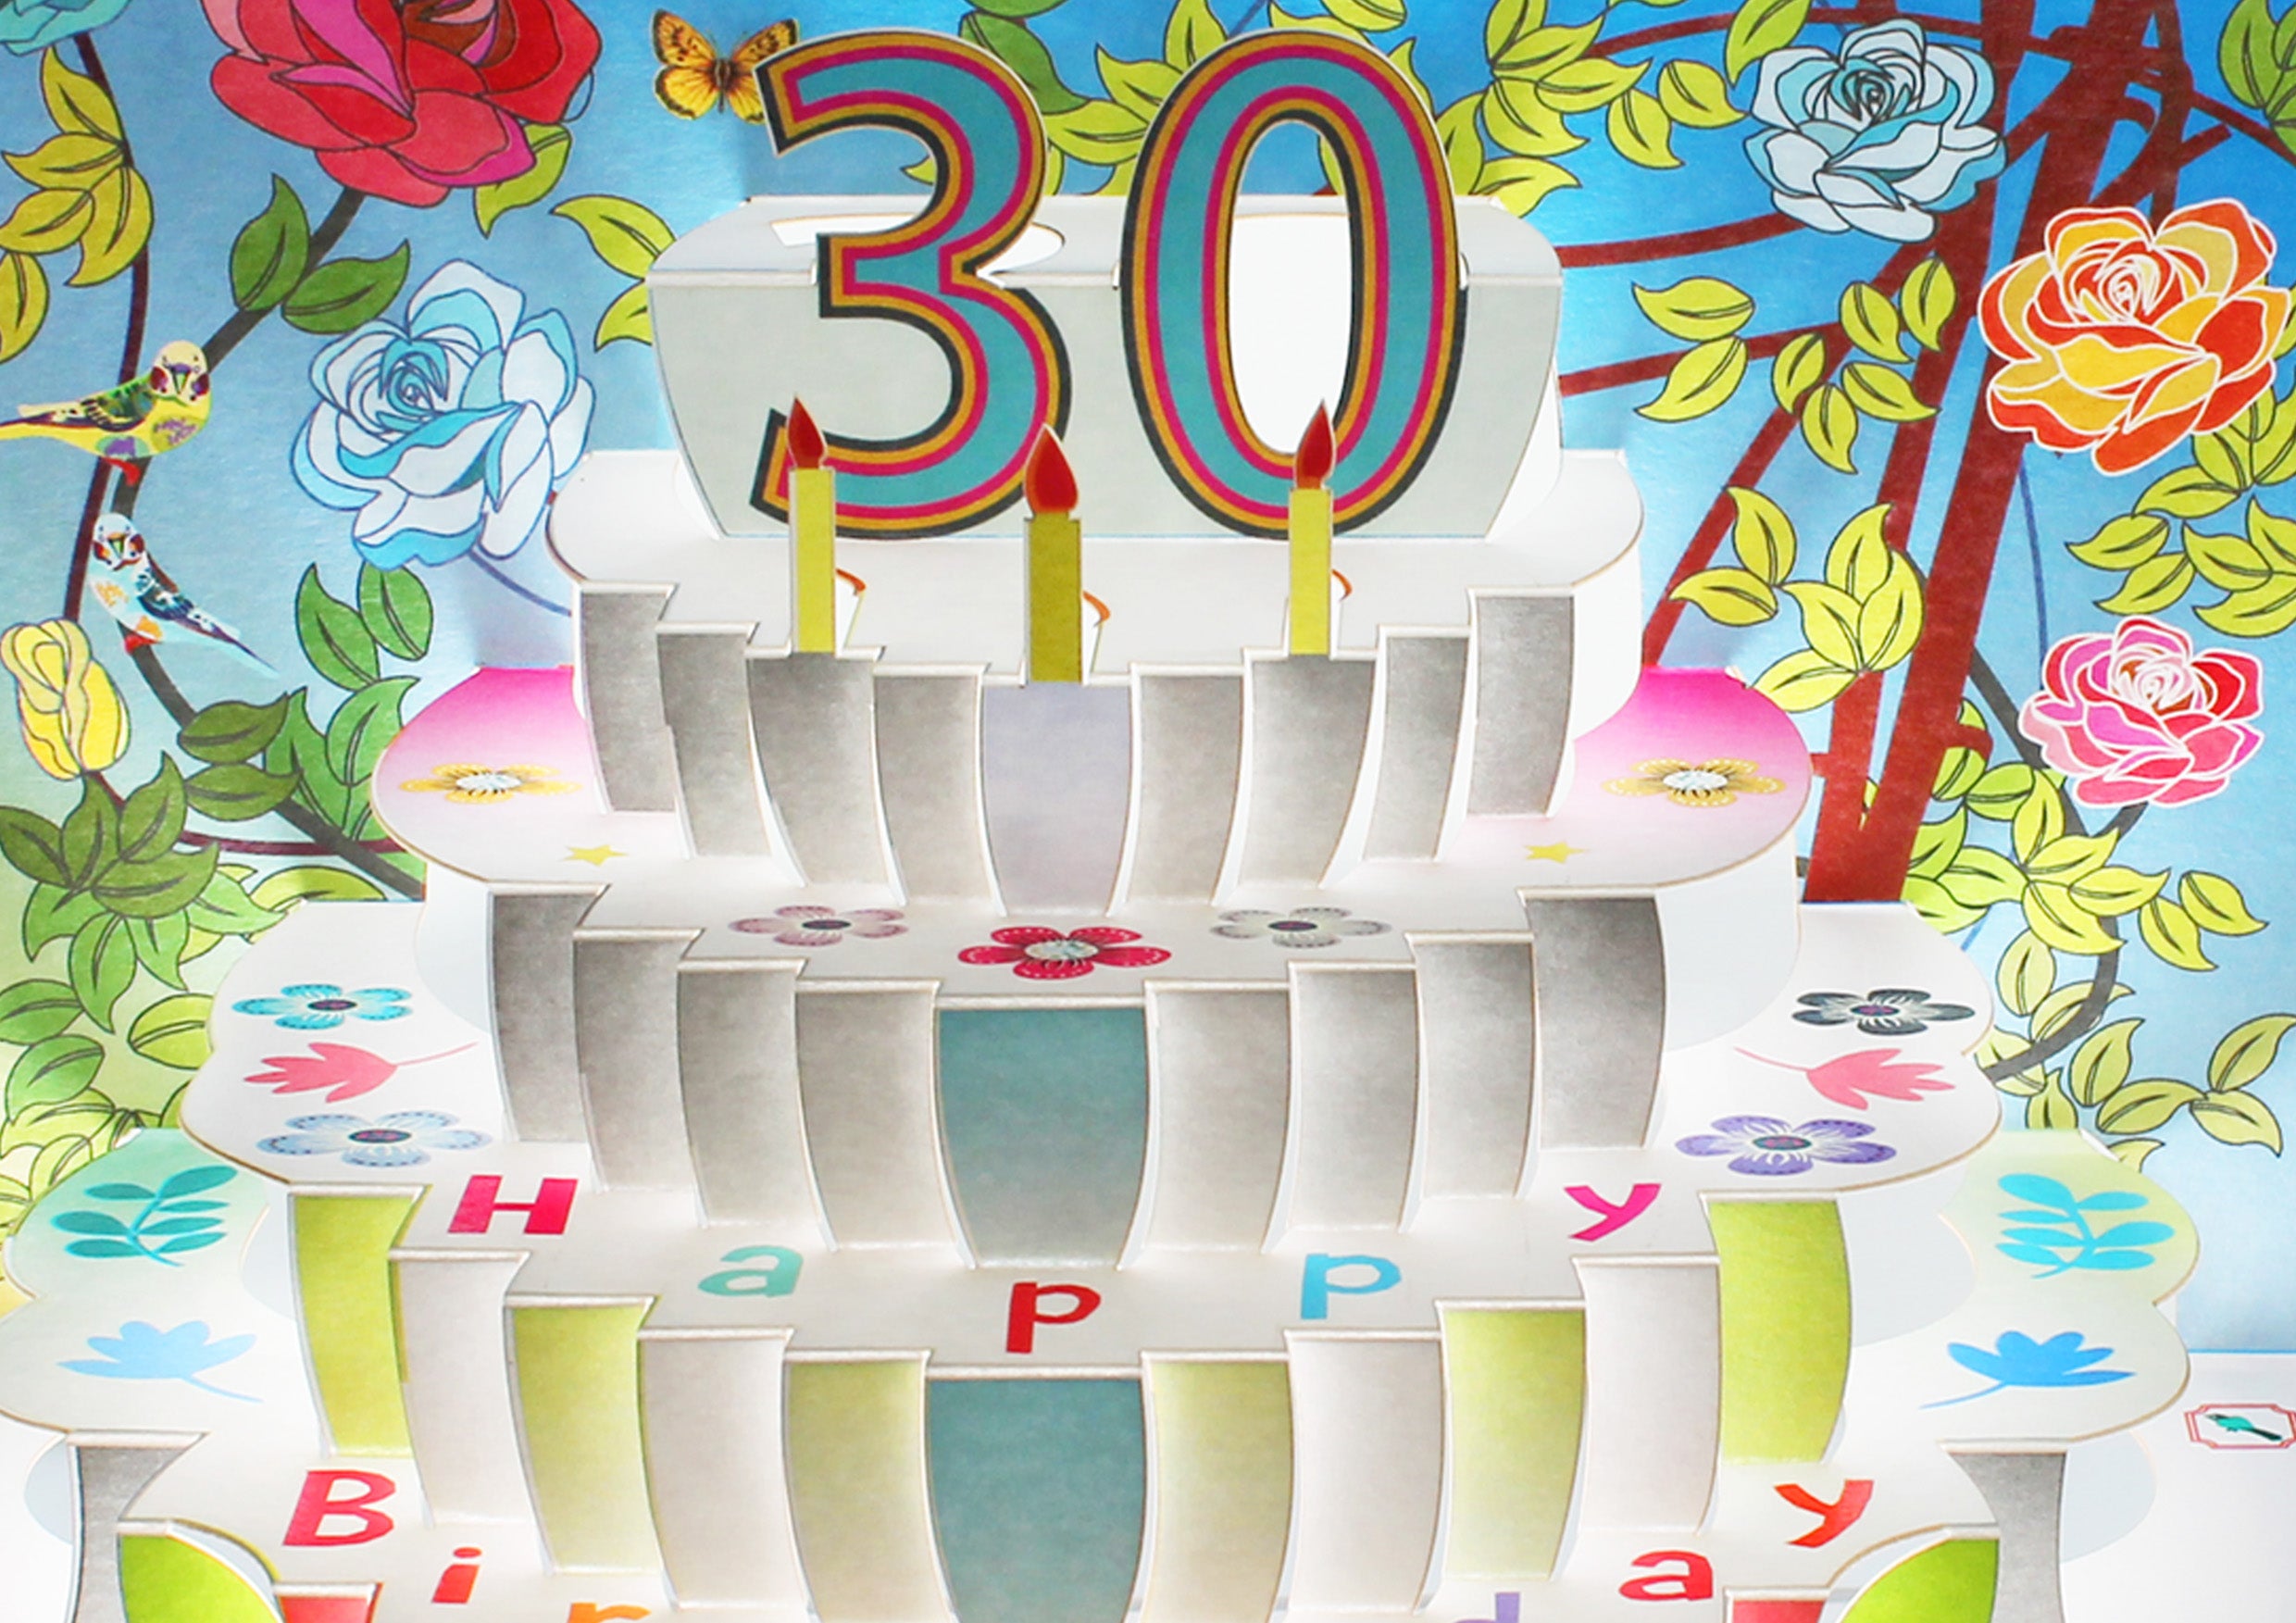 Floral Happy 30th Birthday 3D Pop Up Greetings Card